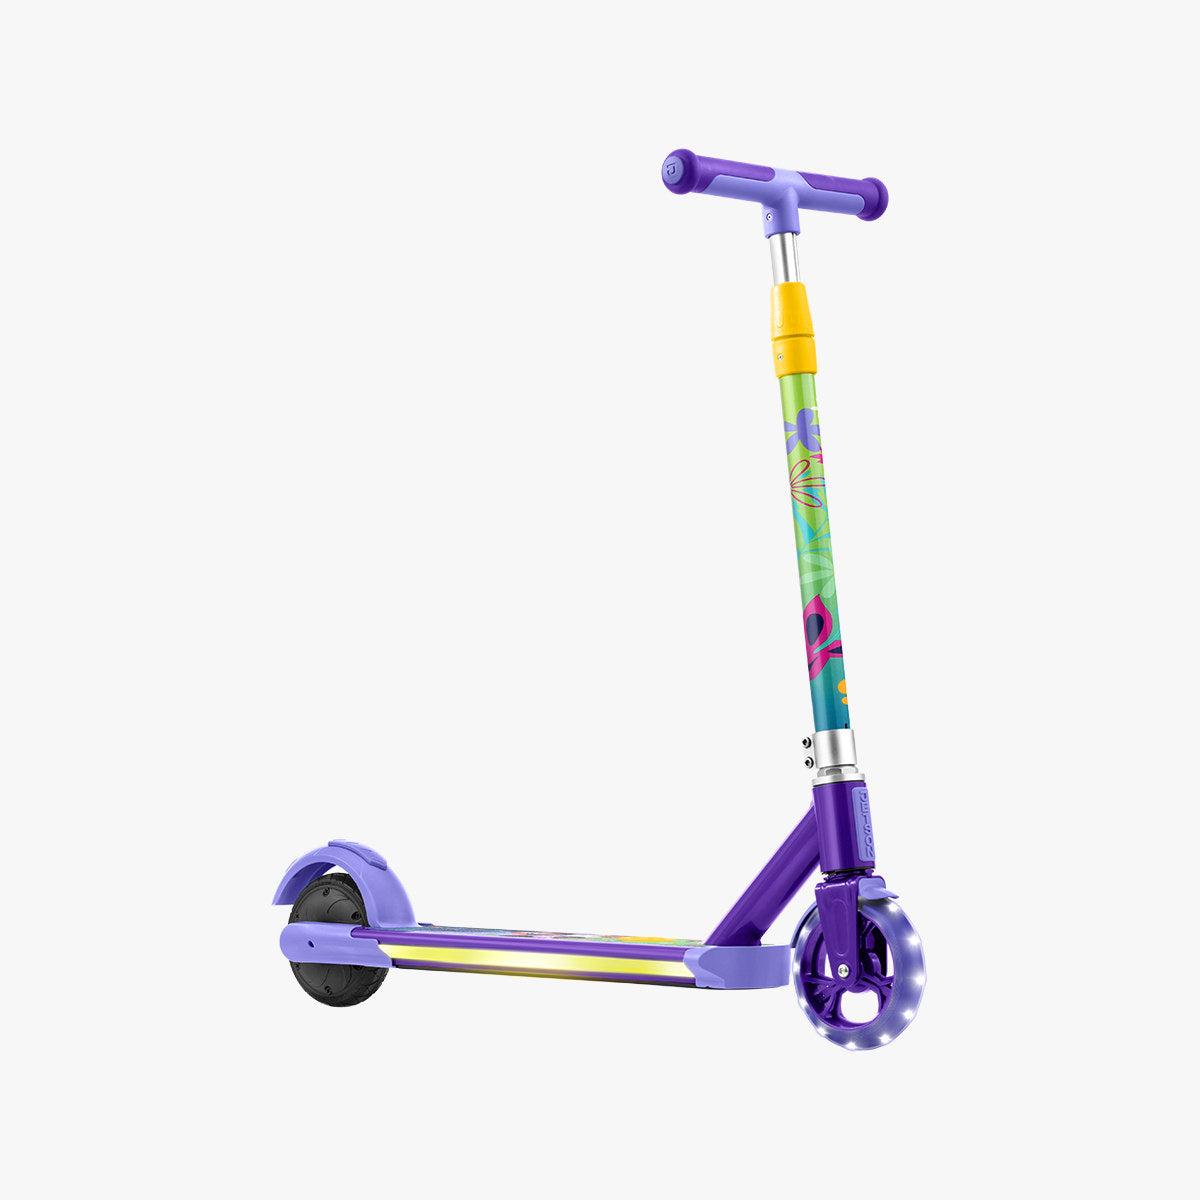 angled view of the disney encanto electric scooter facing to the right